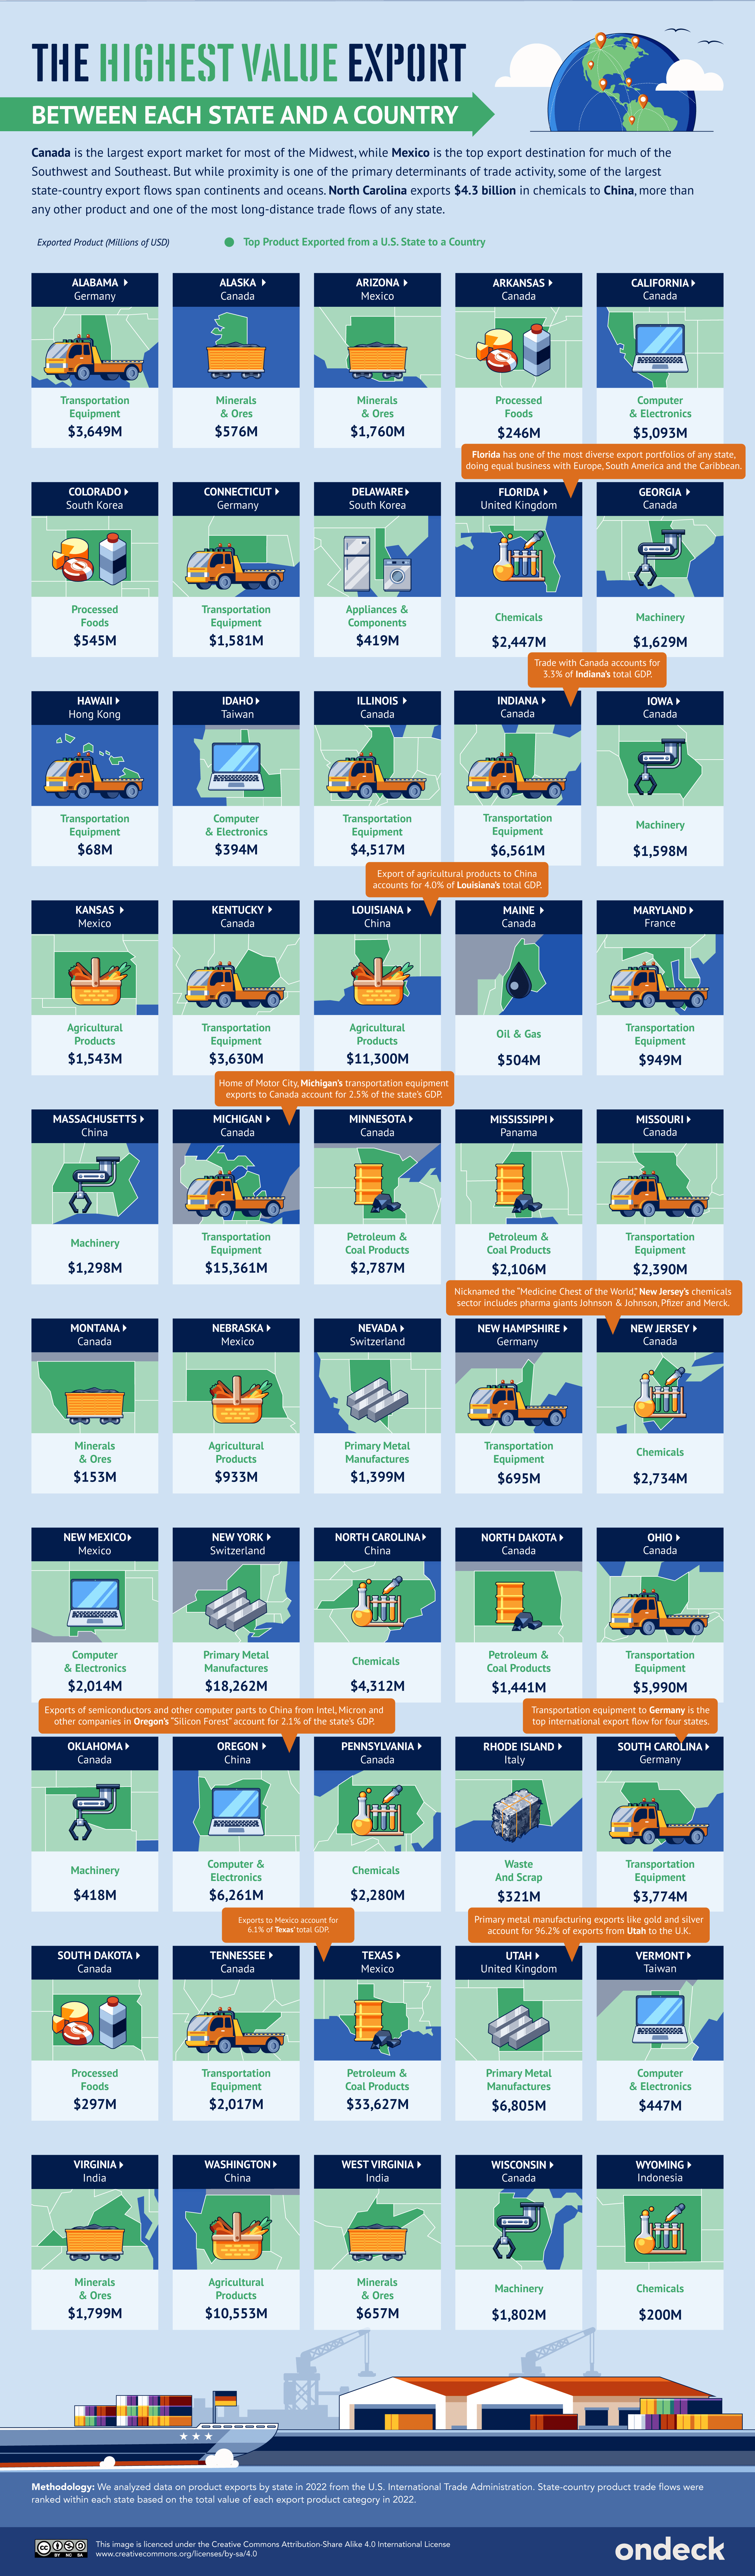 Infographic showing America's highest value exports